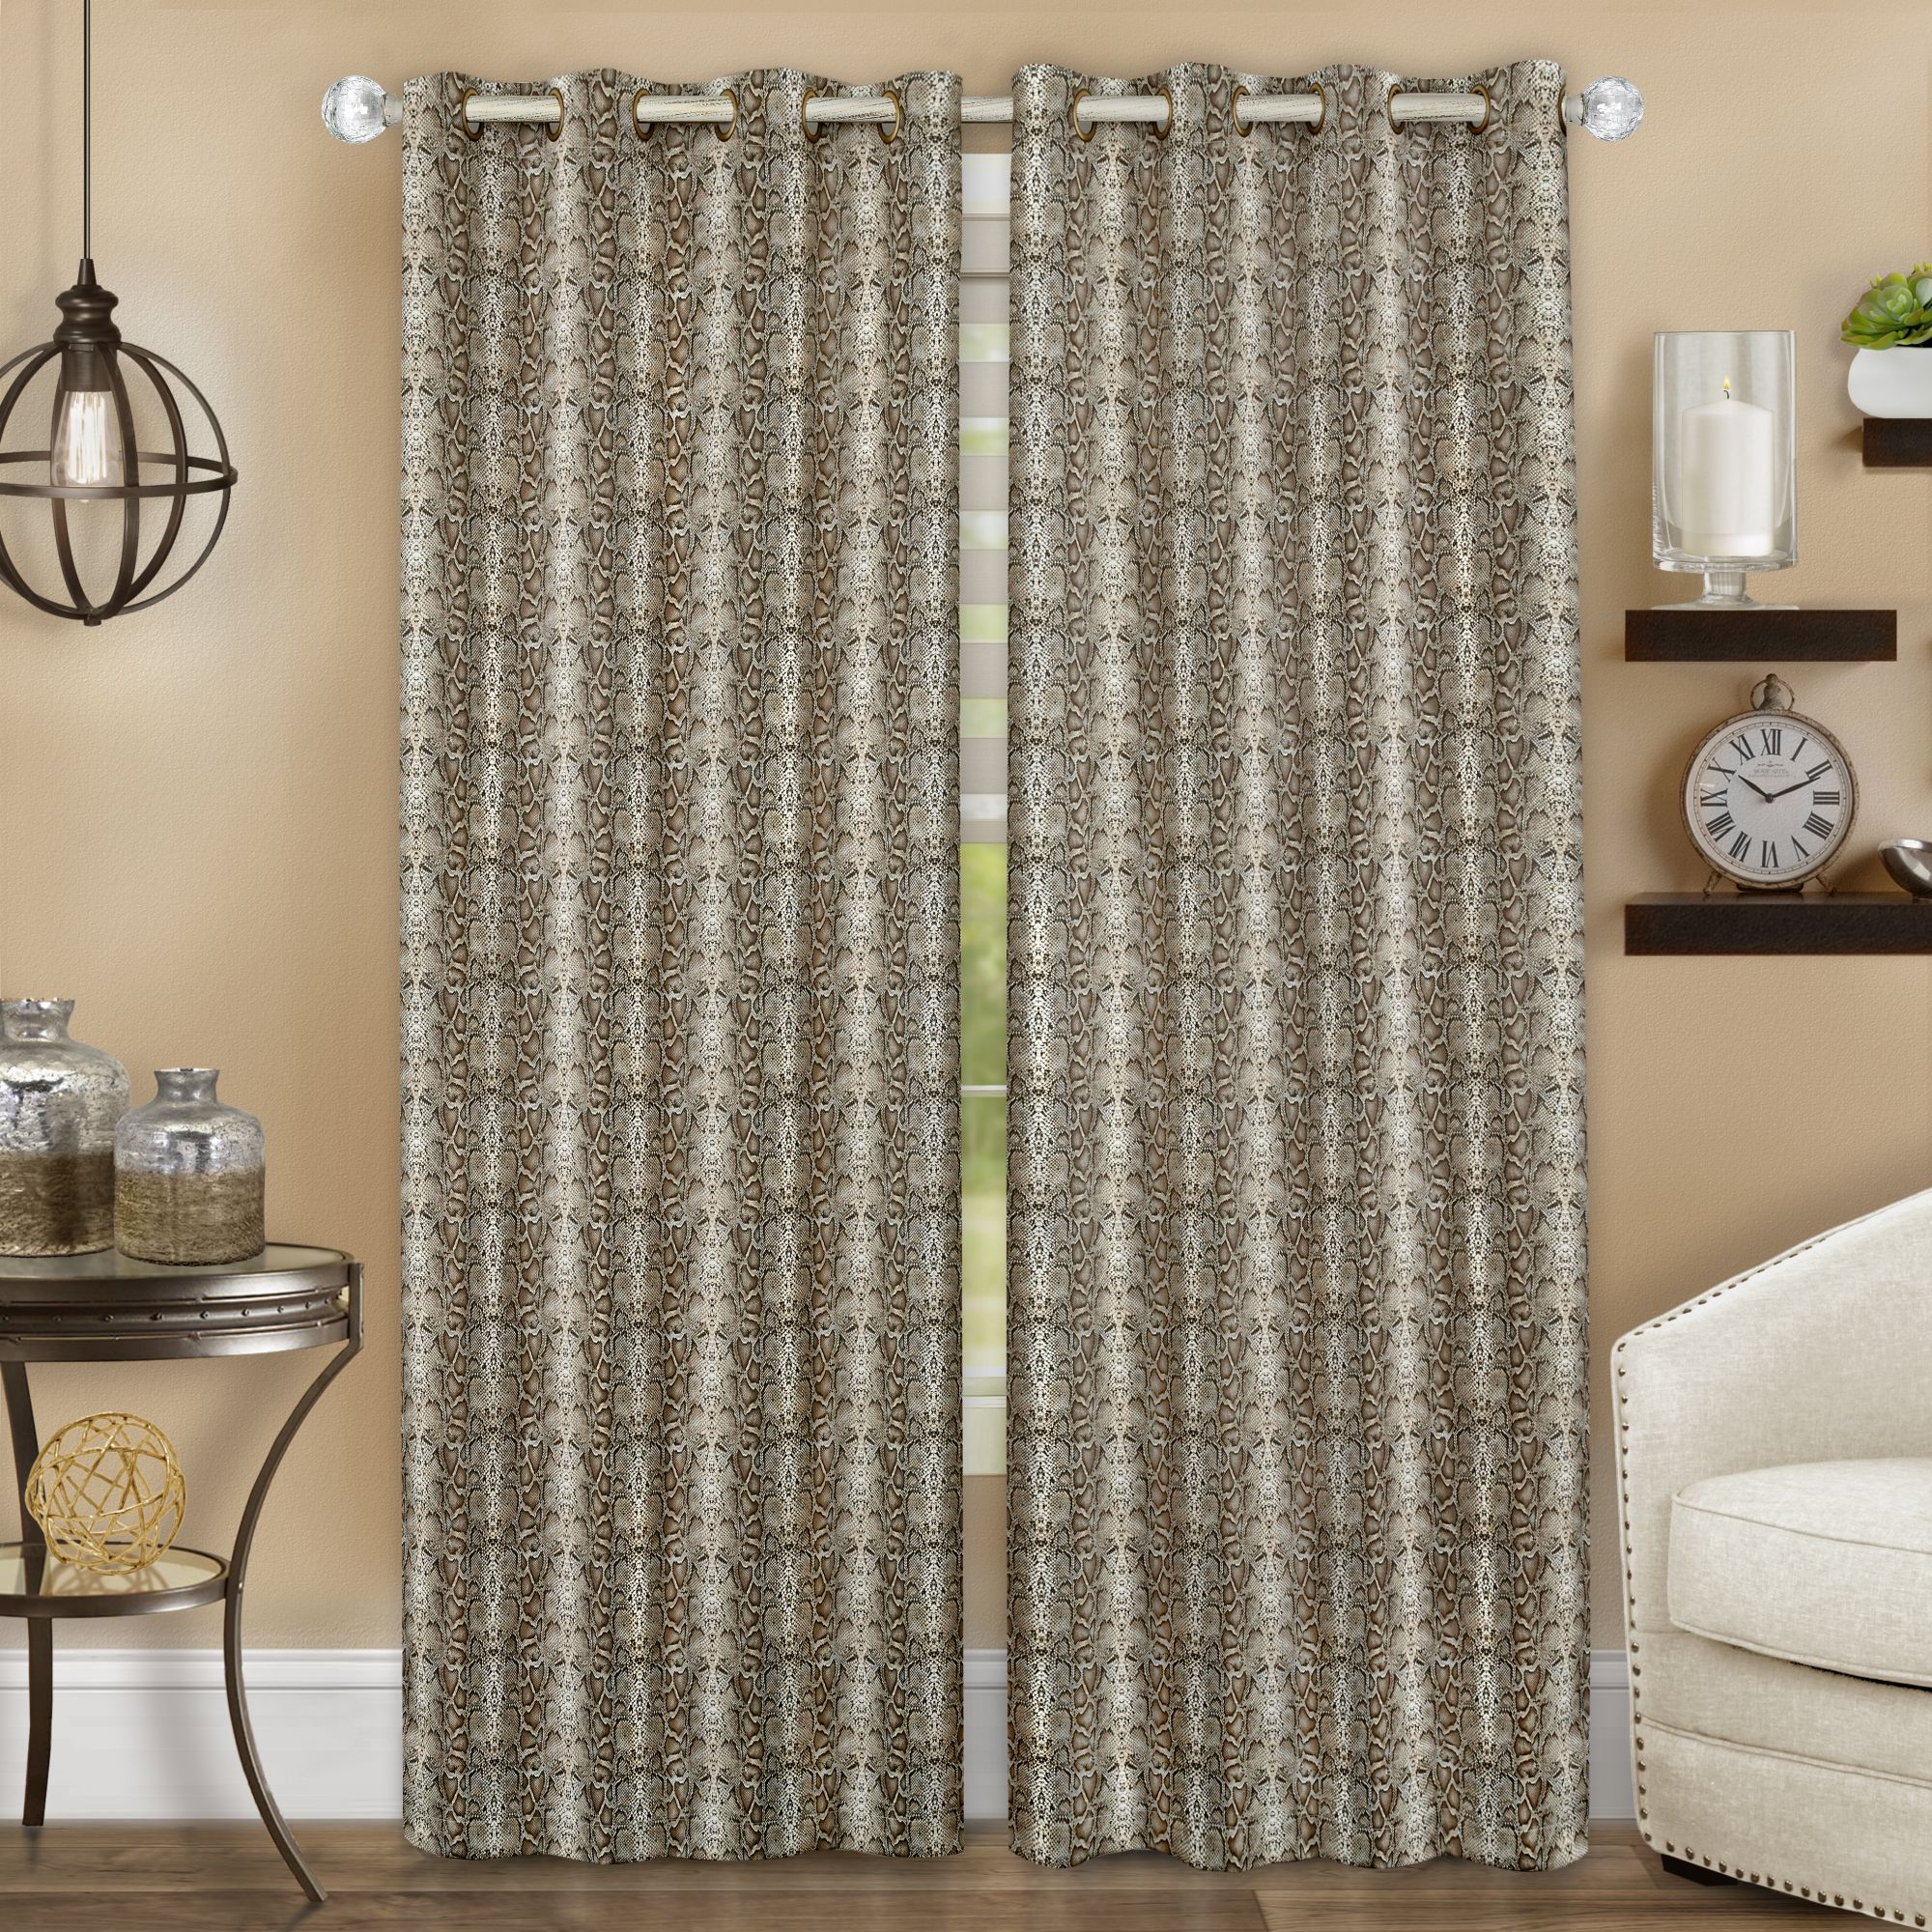 Achim Python Polyester Blackout Window Curtain Panel, Brown/Gold, 52" x 63" - image 1 of 5